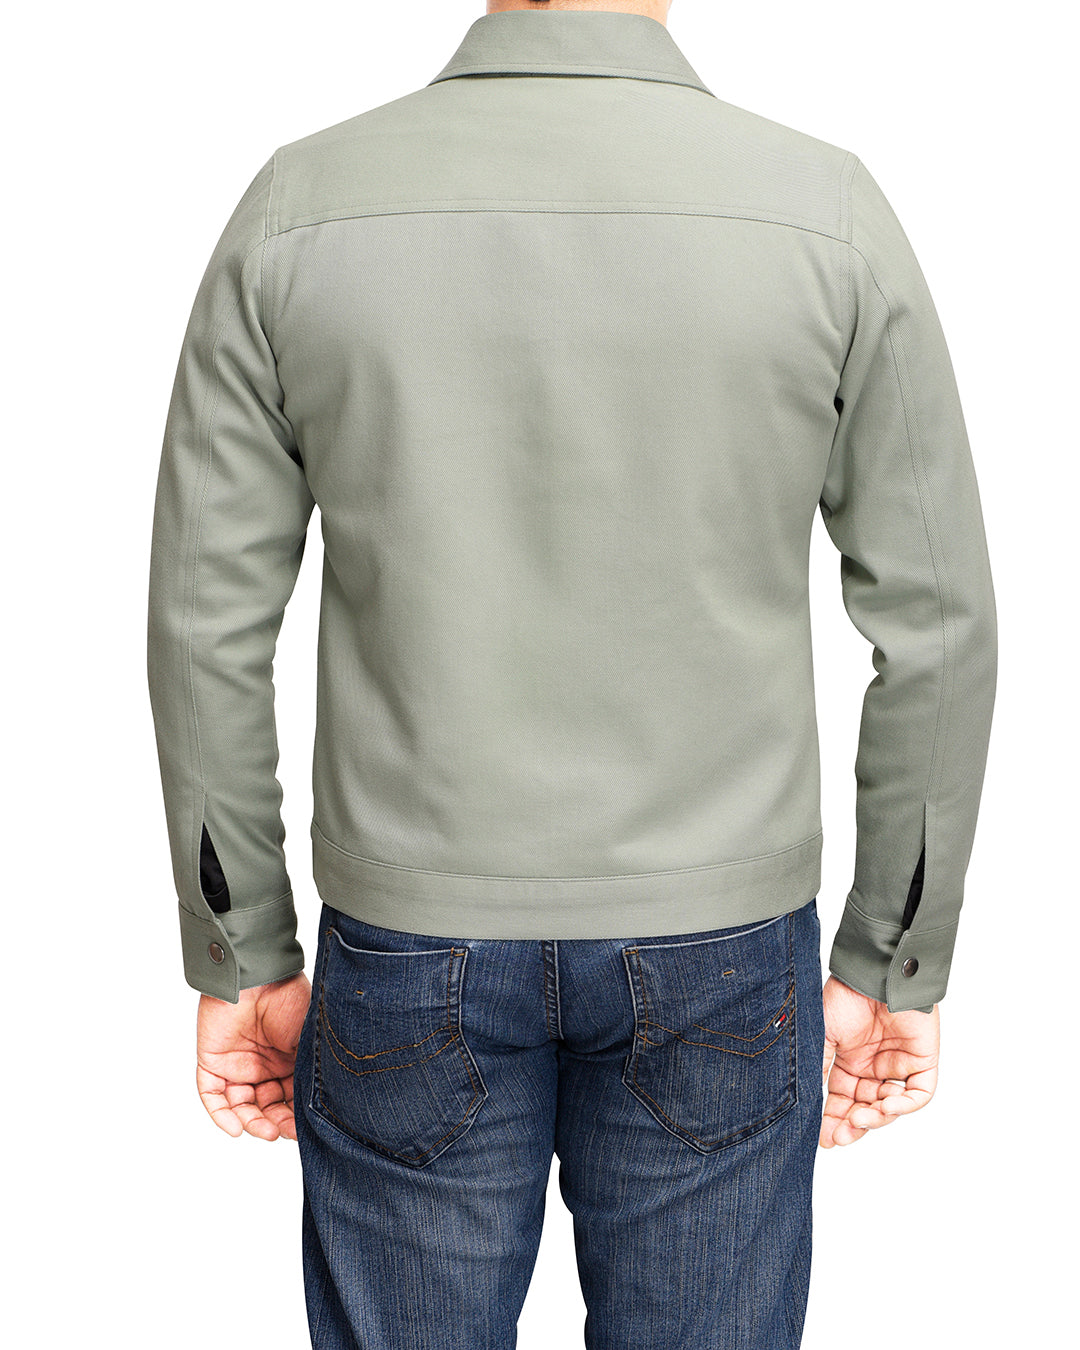 Back of model wearing the twill shirt jacket for men by Luxire in green